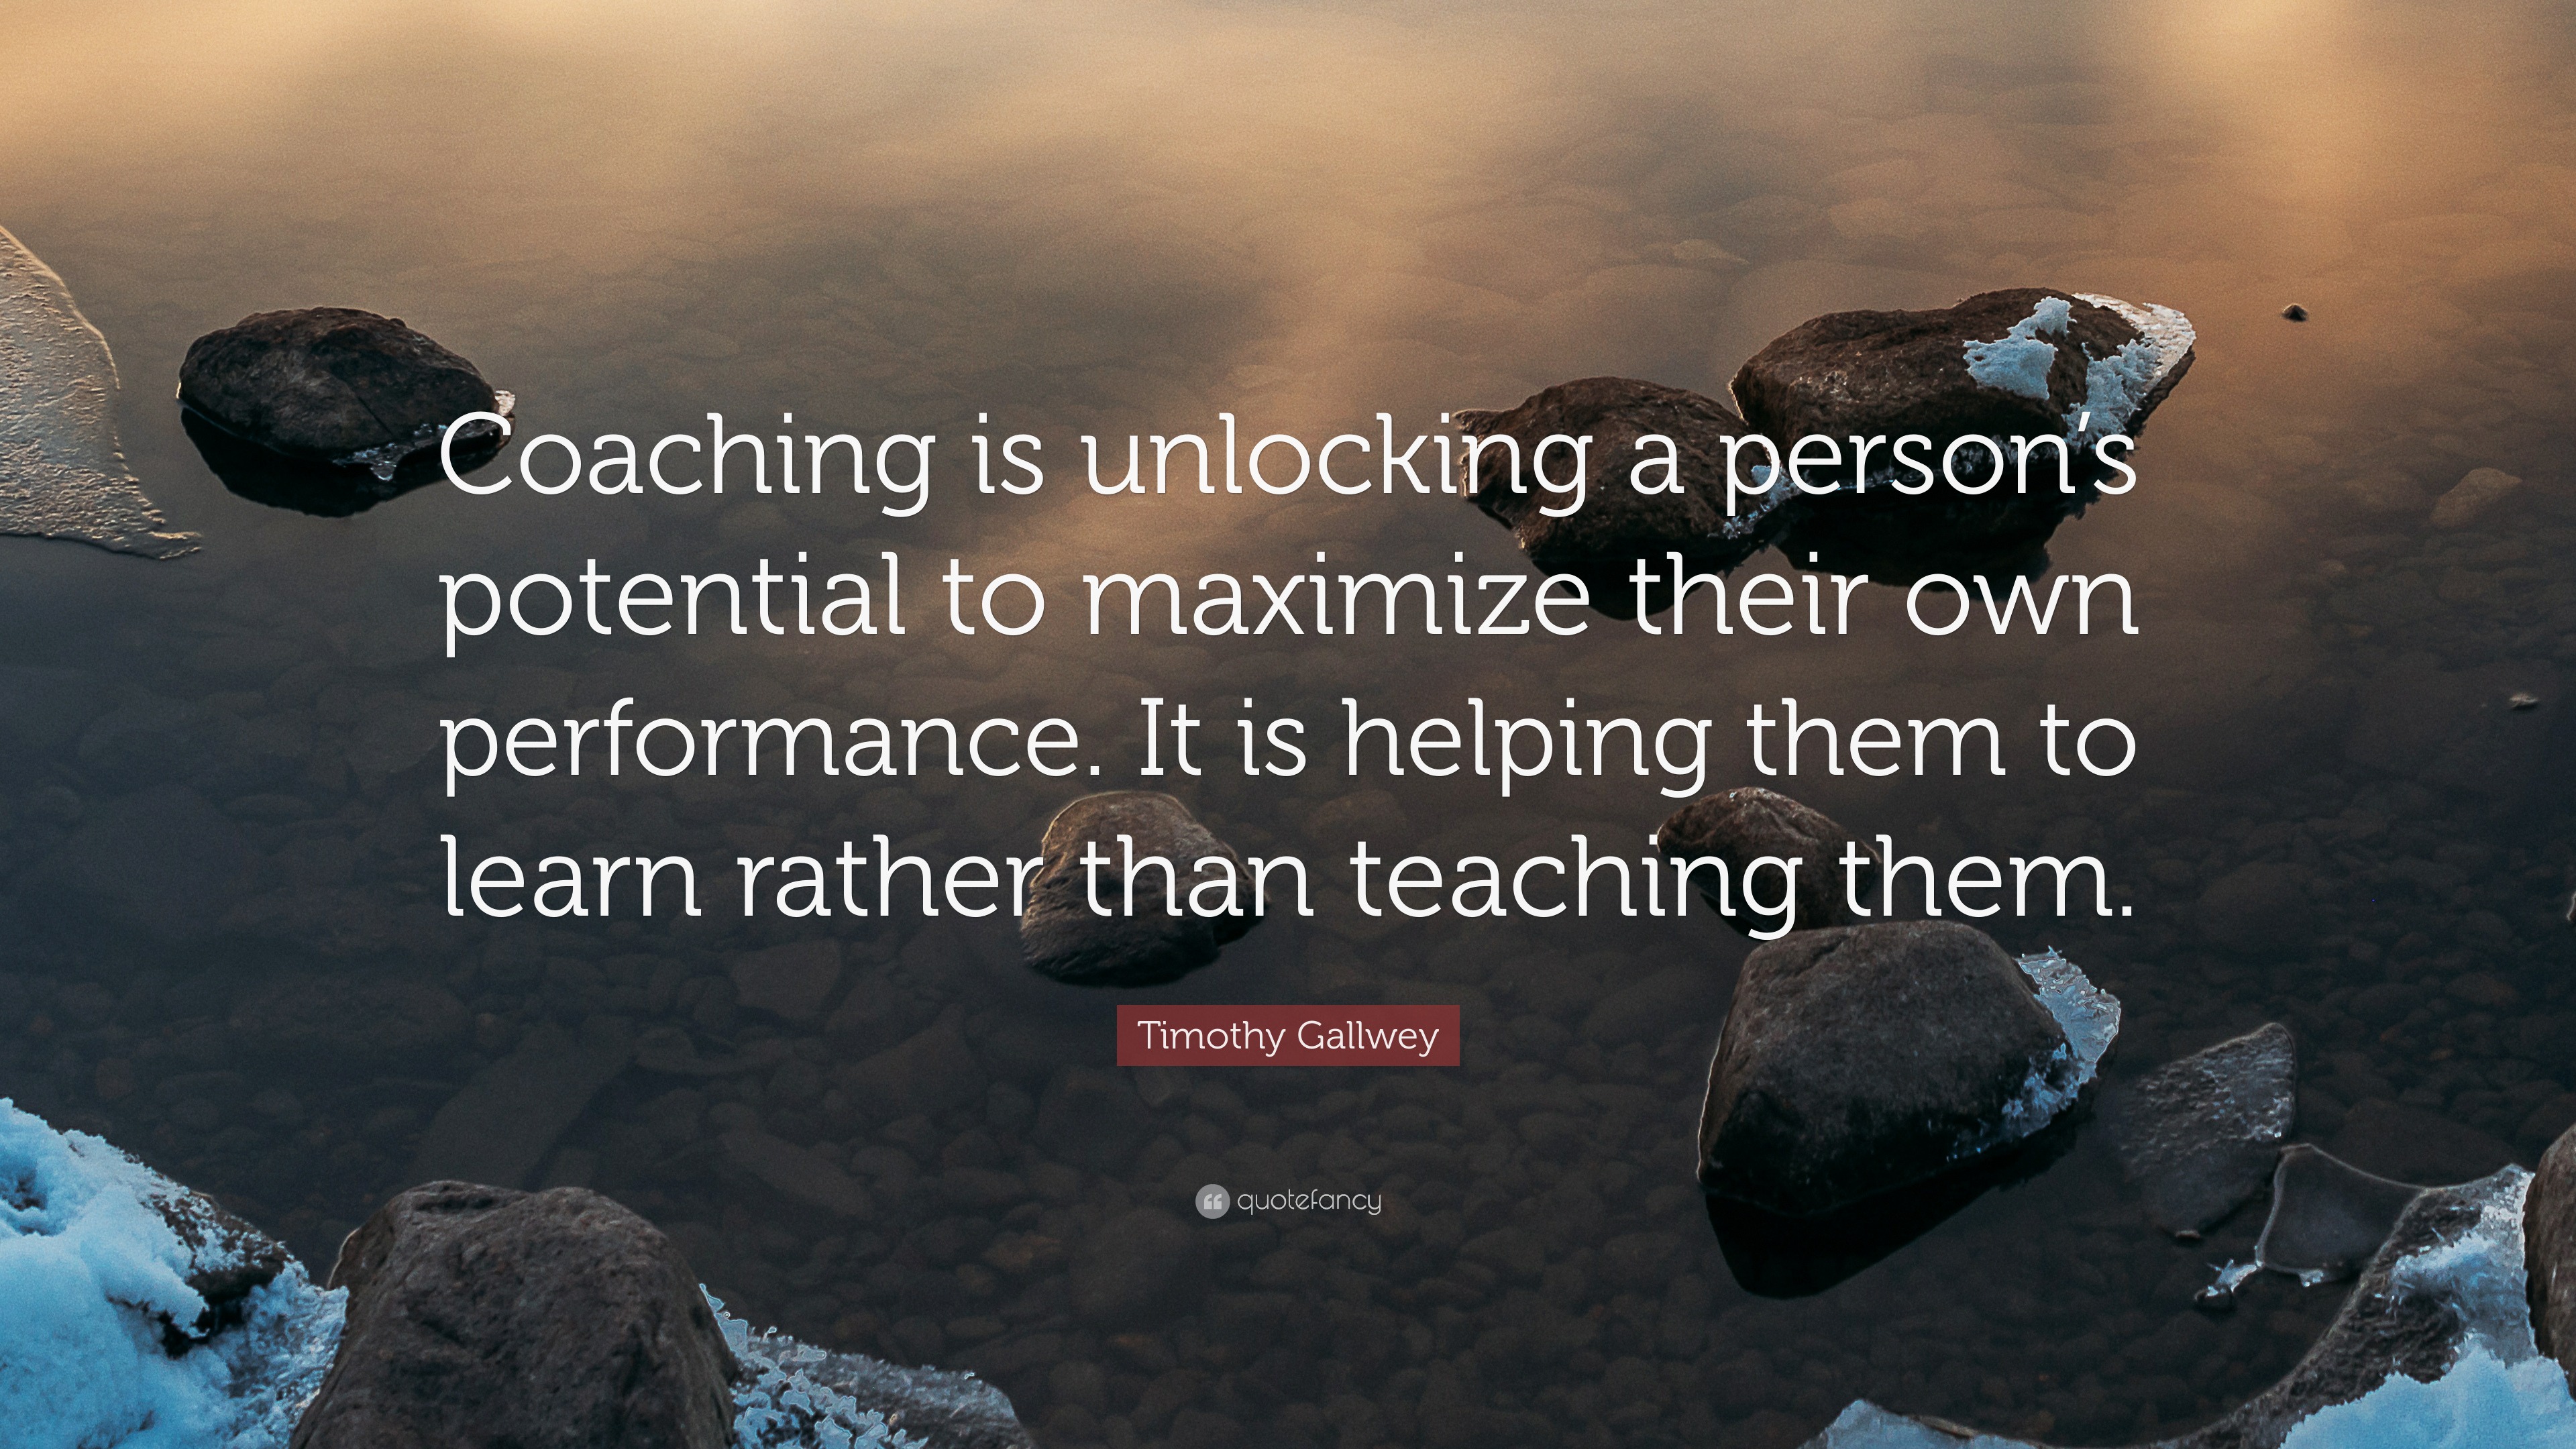 Isse tekst fløjte Timothy Gallwey Quote: “Coaching is unlocking a person's potential to  maximize their own performance. It is helping them to learn rather than  te...”